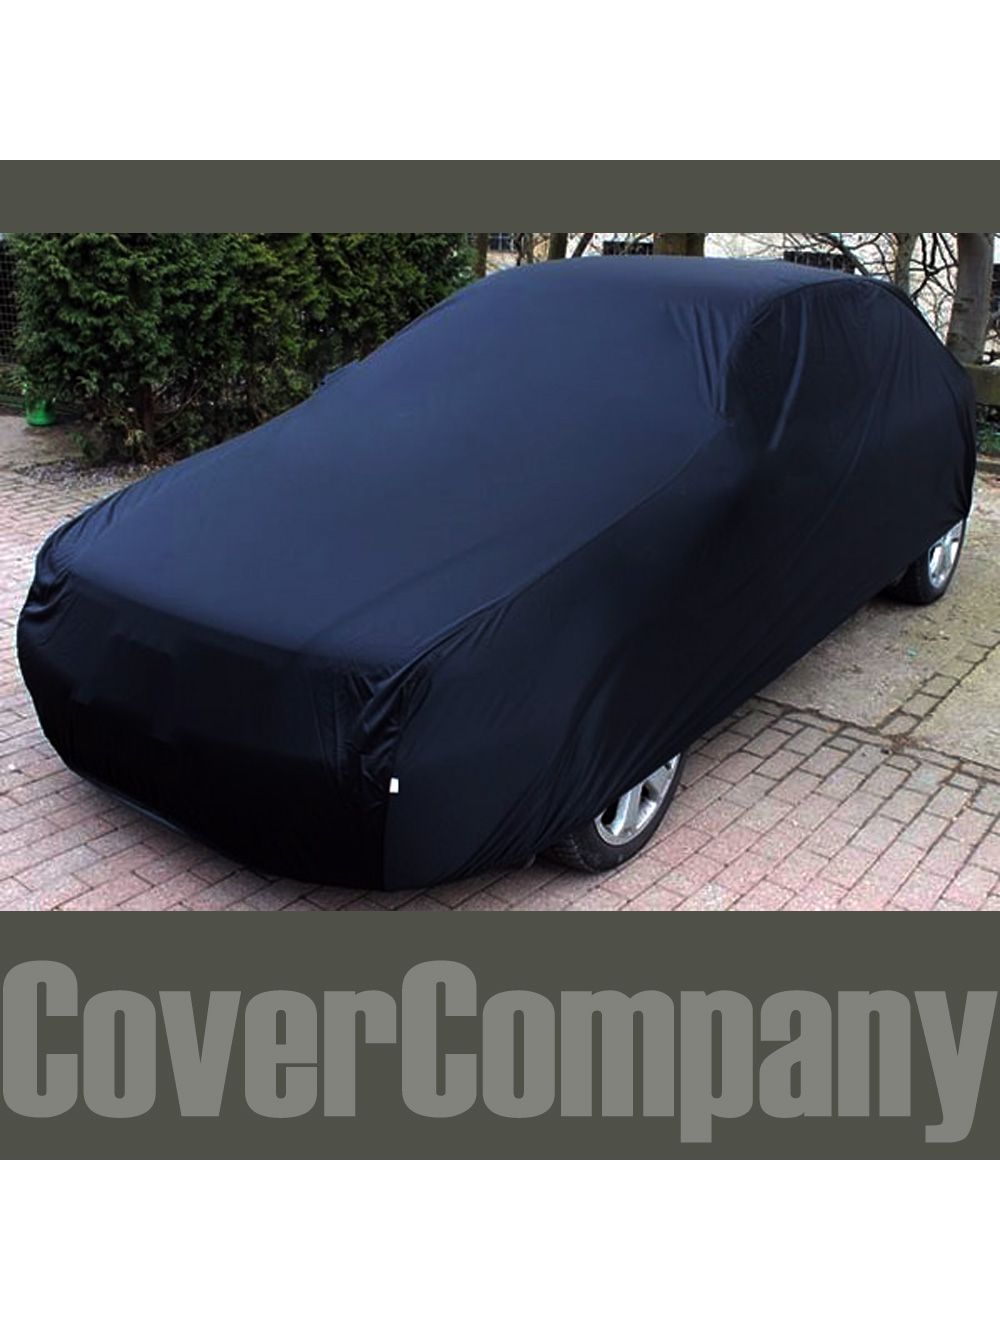 Audi Car Covers. Indoor Car Cover for Audi